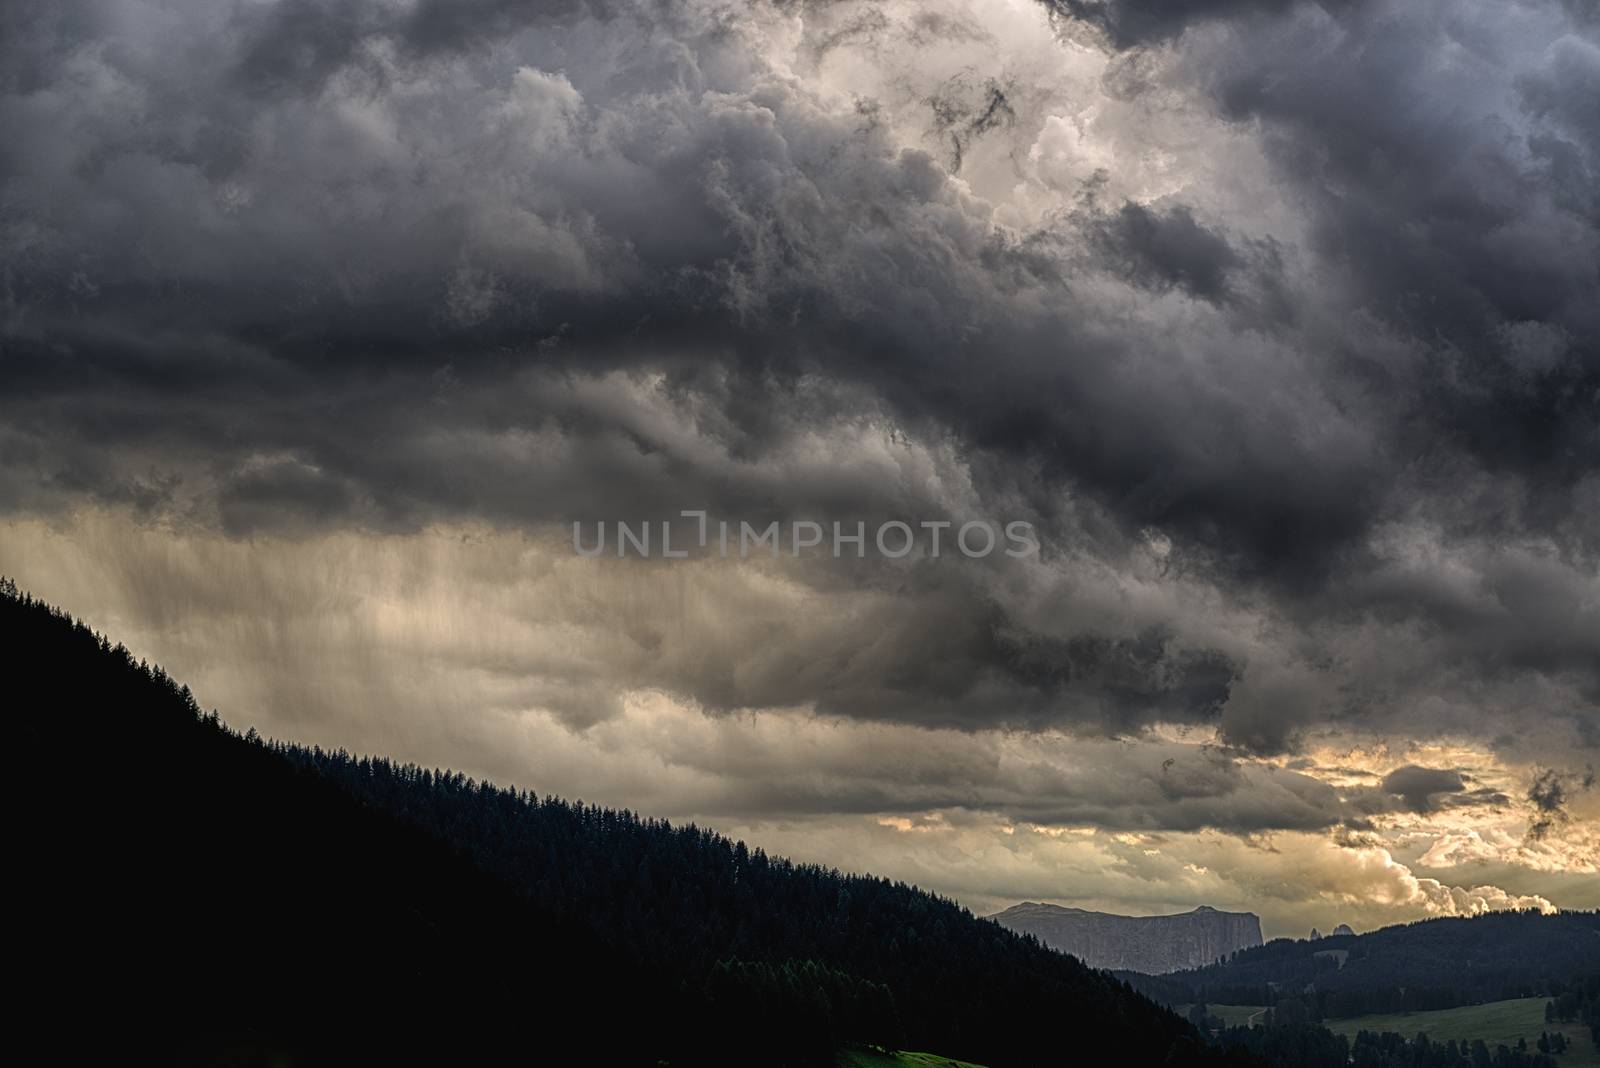 The storm is coming over the valley by Mdc1970